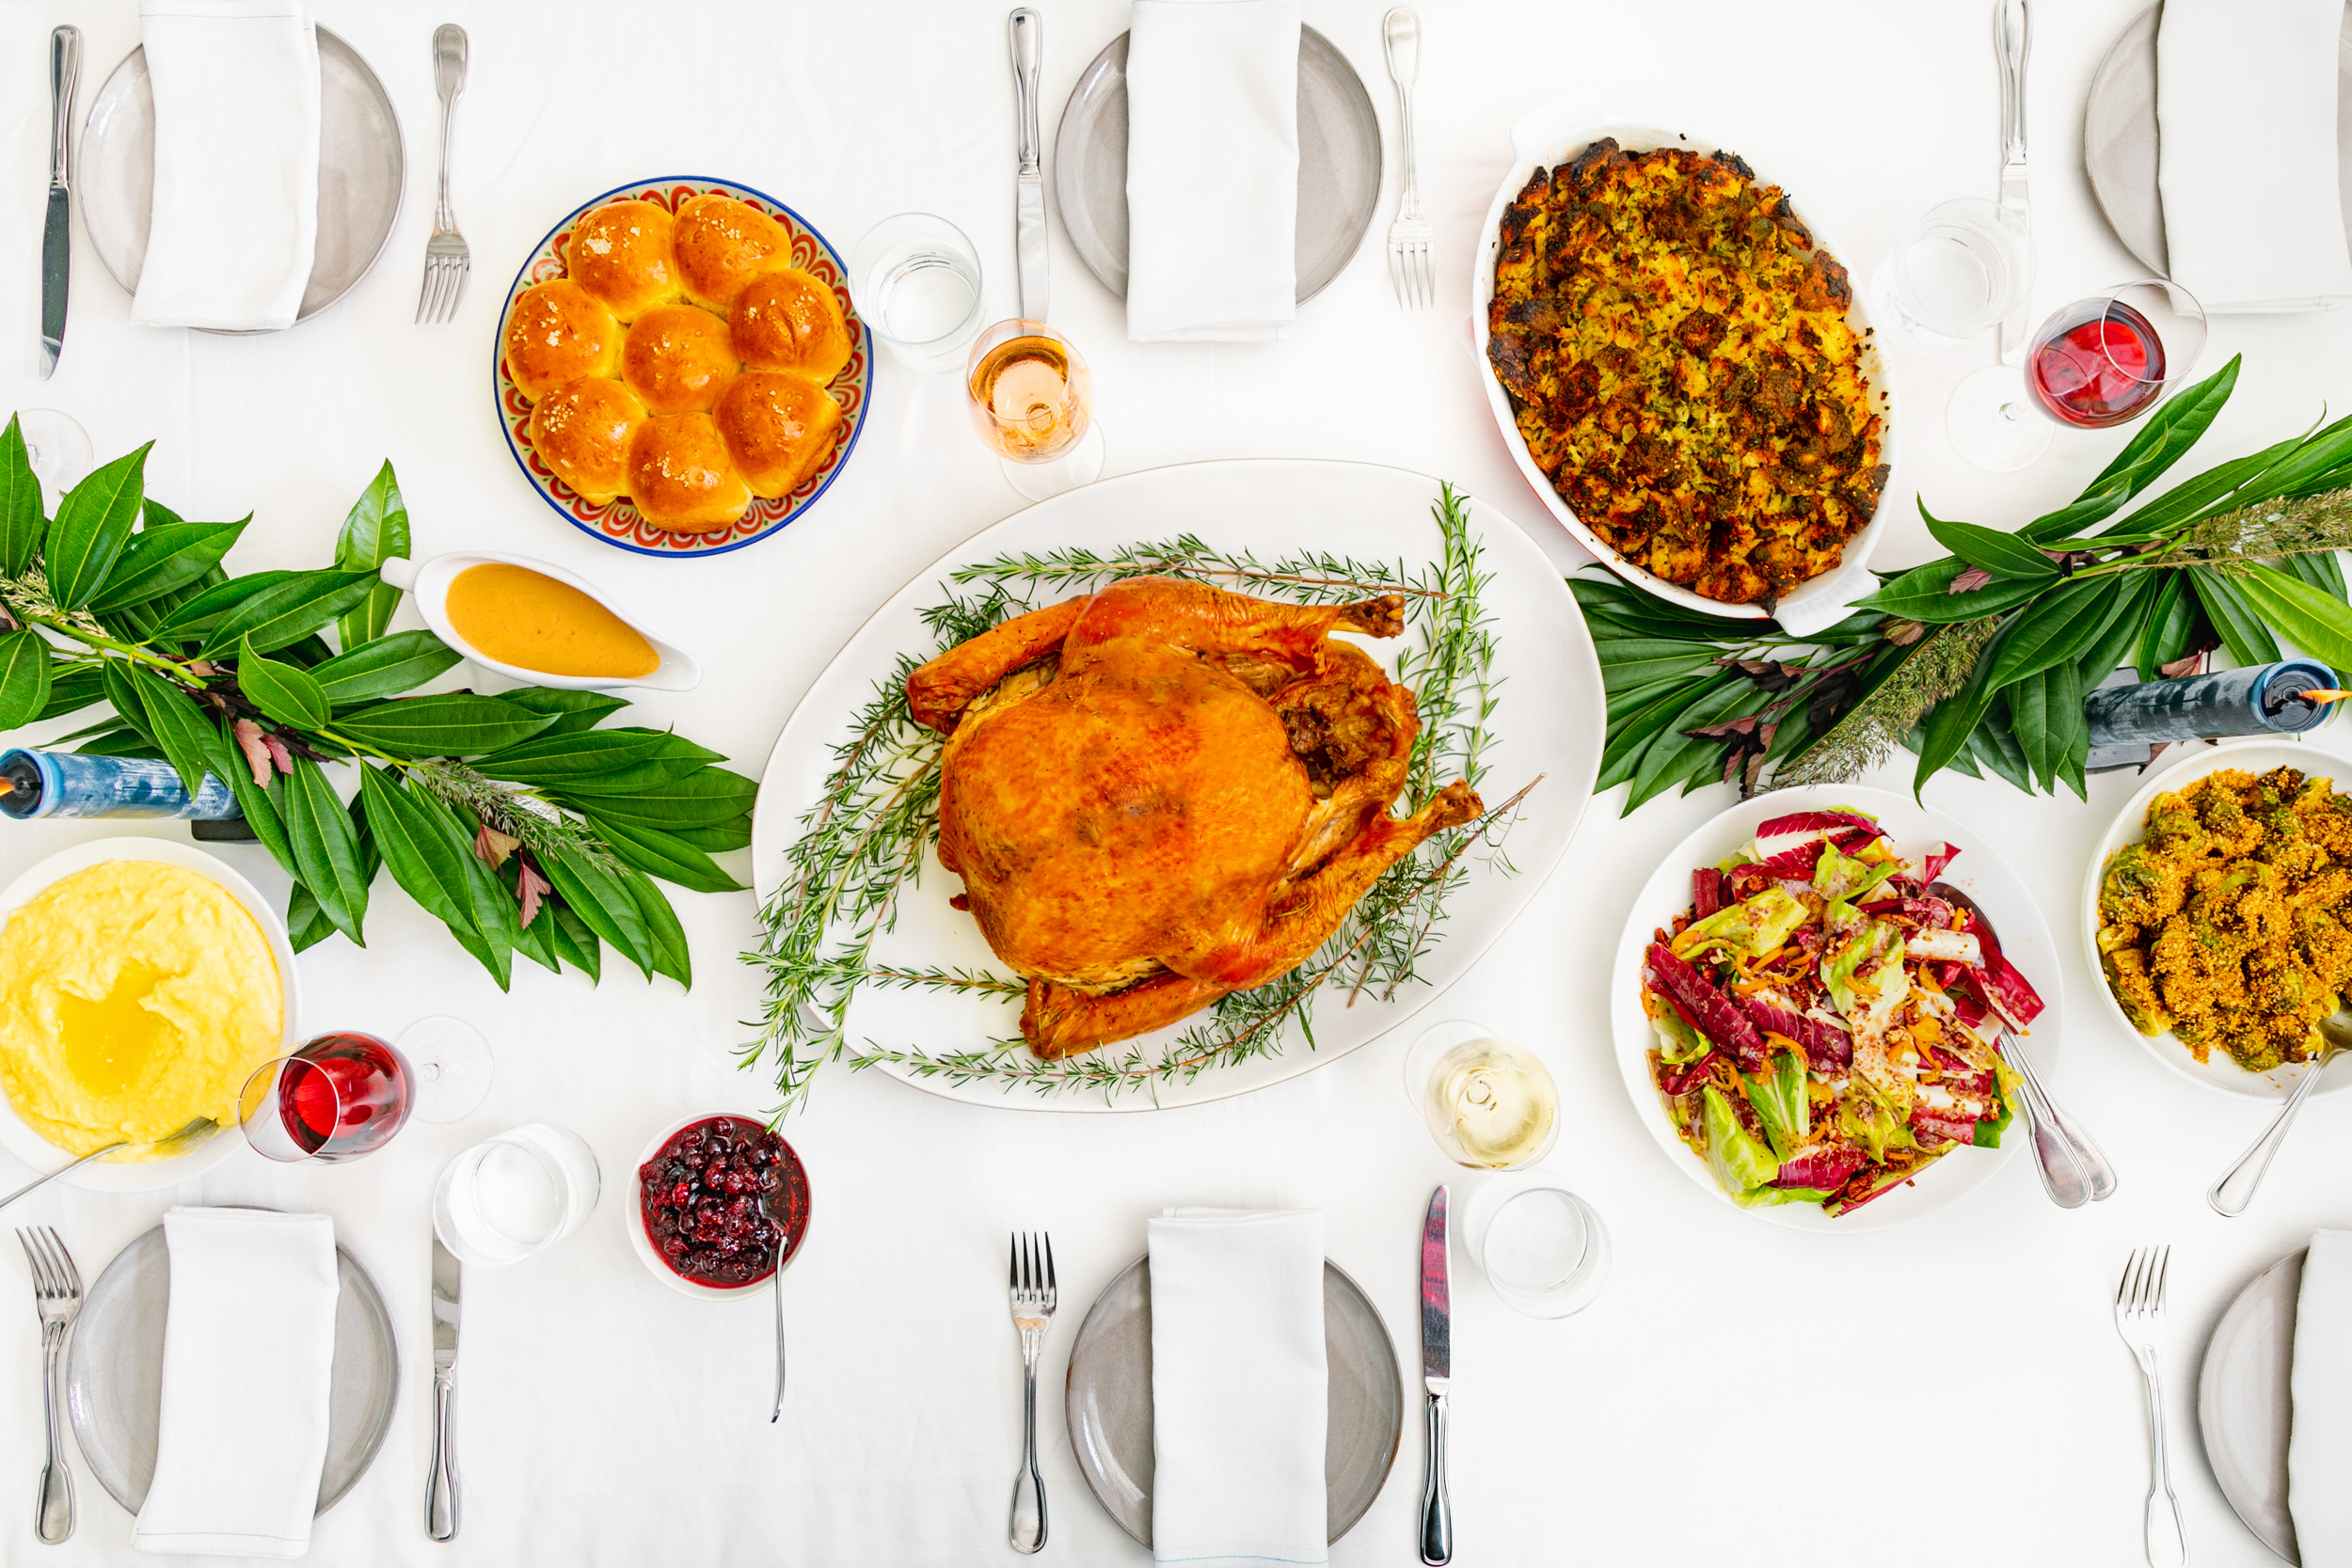 A Thanksgiving meal, including roasted turkey, bread rolls, salad, cranberries, and more, on a white tablecloth.